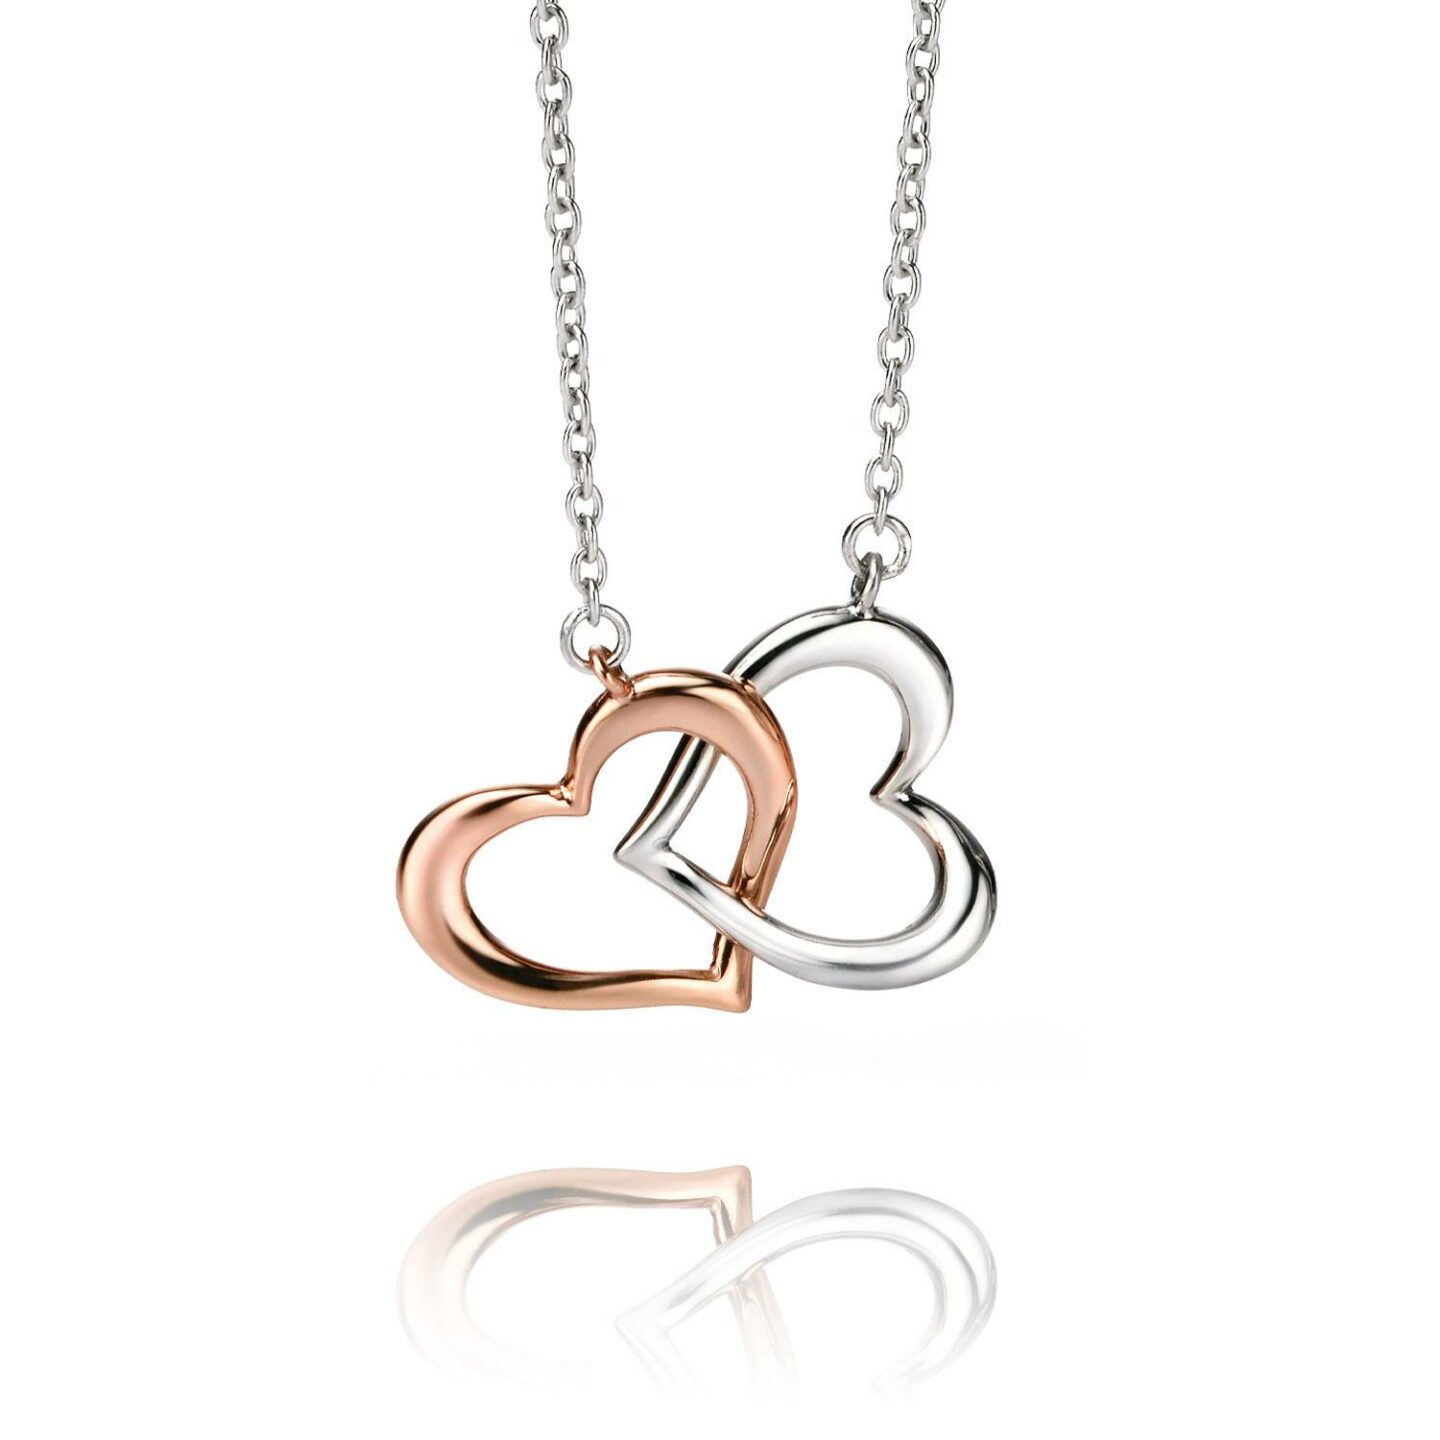 Fiorelli Silver Rose Plated Double Heart Necklace